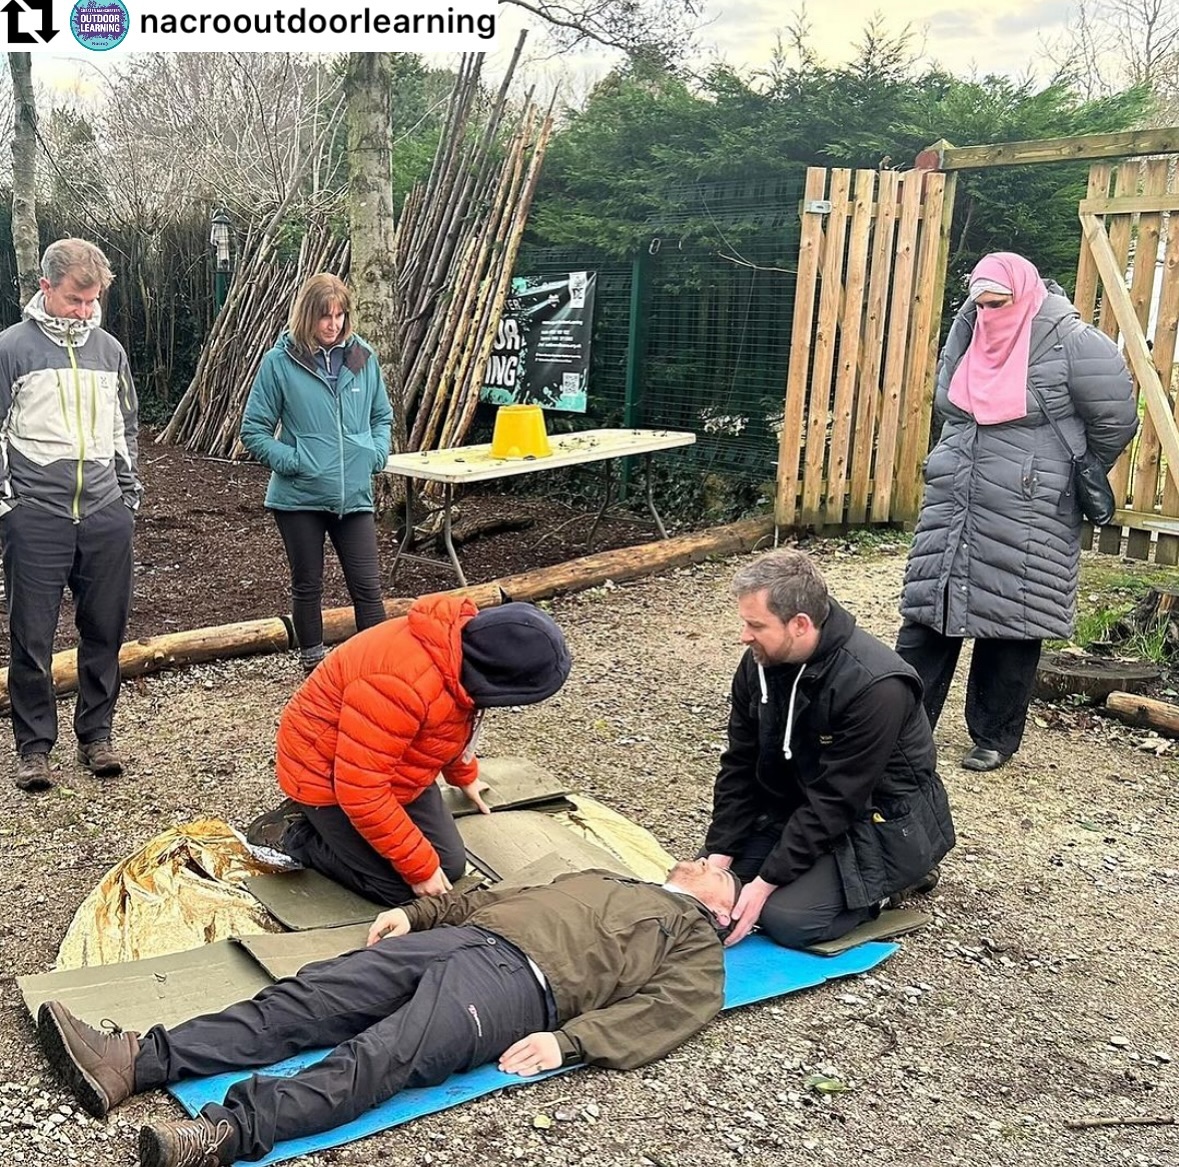 Repost from @nacrocharity - Our @nacrocharity volunteers and friends from the community have had a fantastic weekend completing their 16 hr outdoors first aid course with @wilderness_development at Wythenshawe Park @mcrparks_ . Well done everyone! ⛰️🥾⛰️